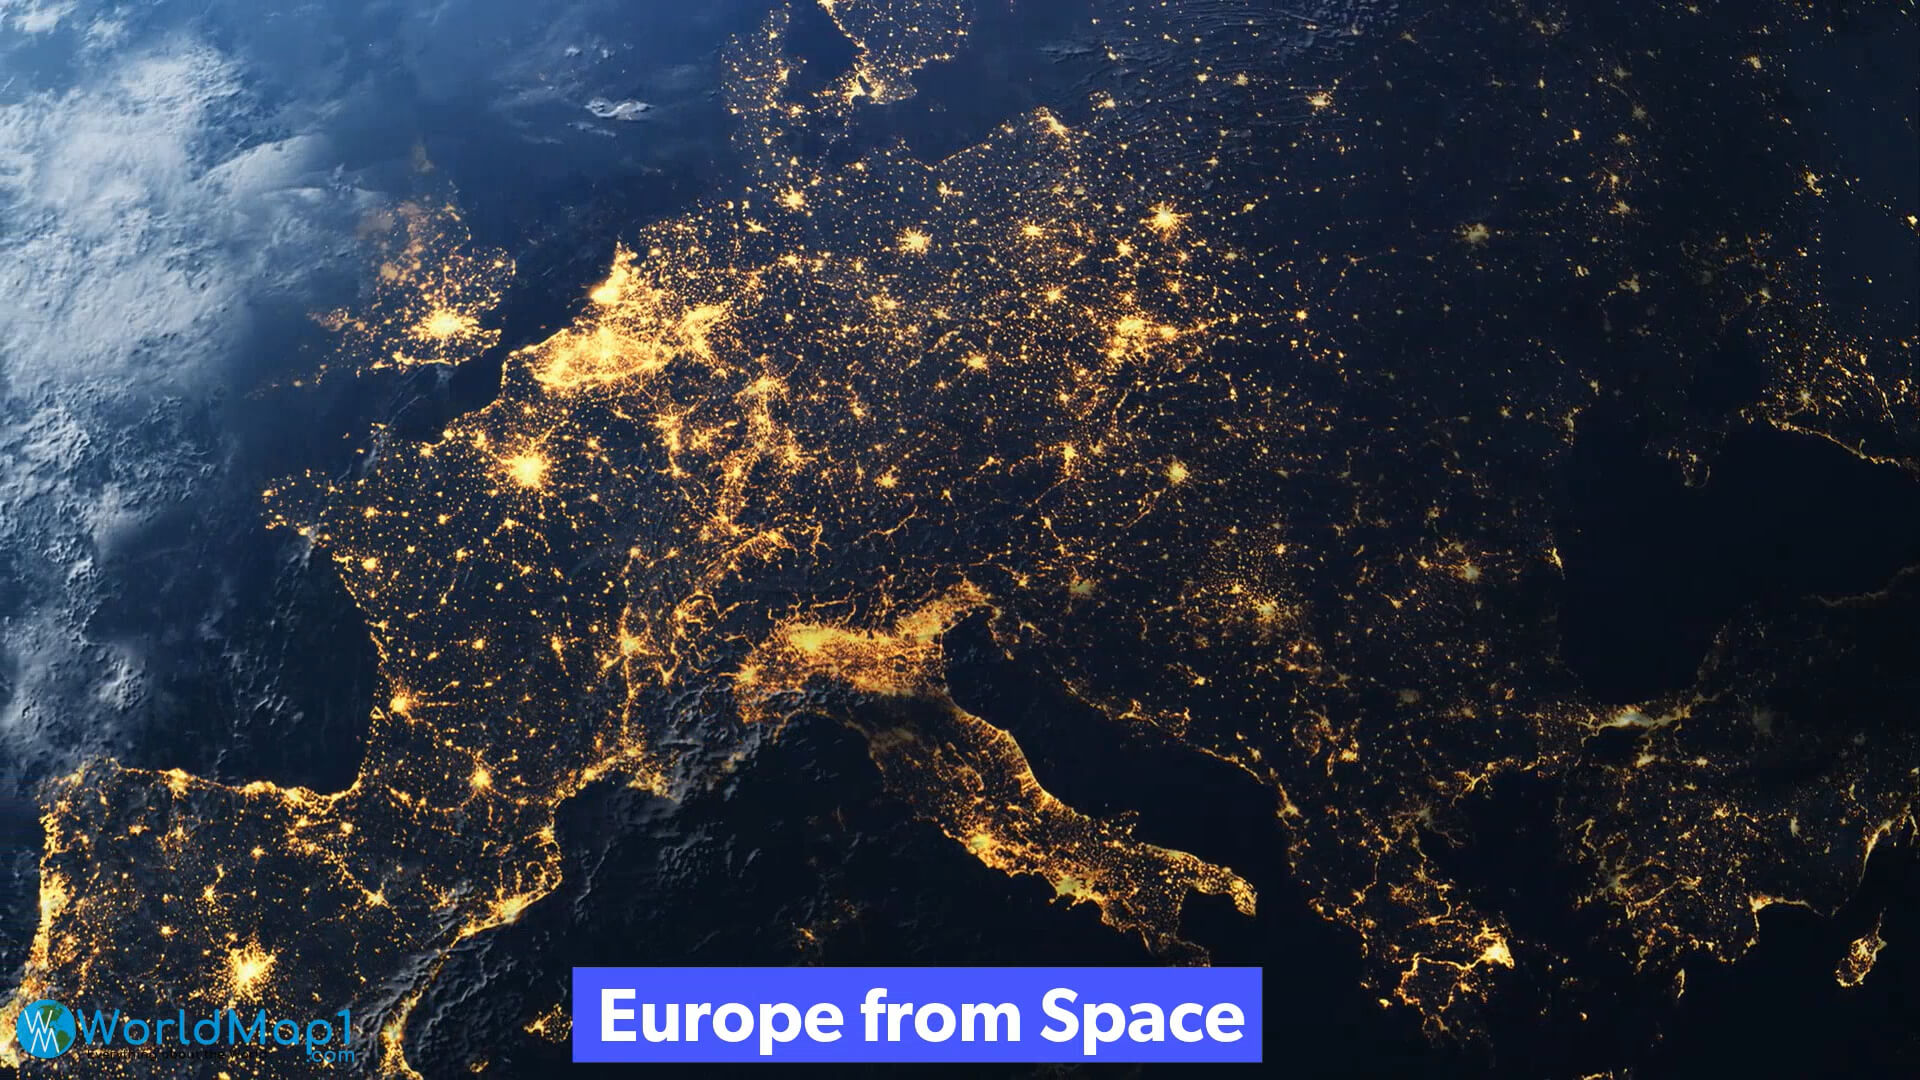 Europe from Space in the Night